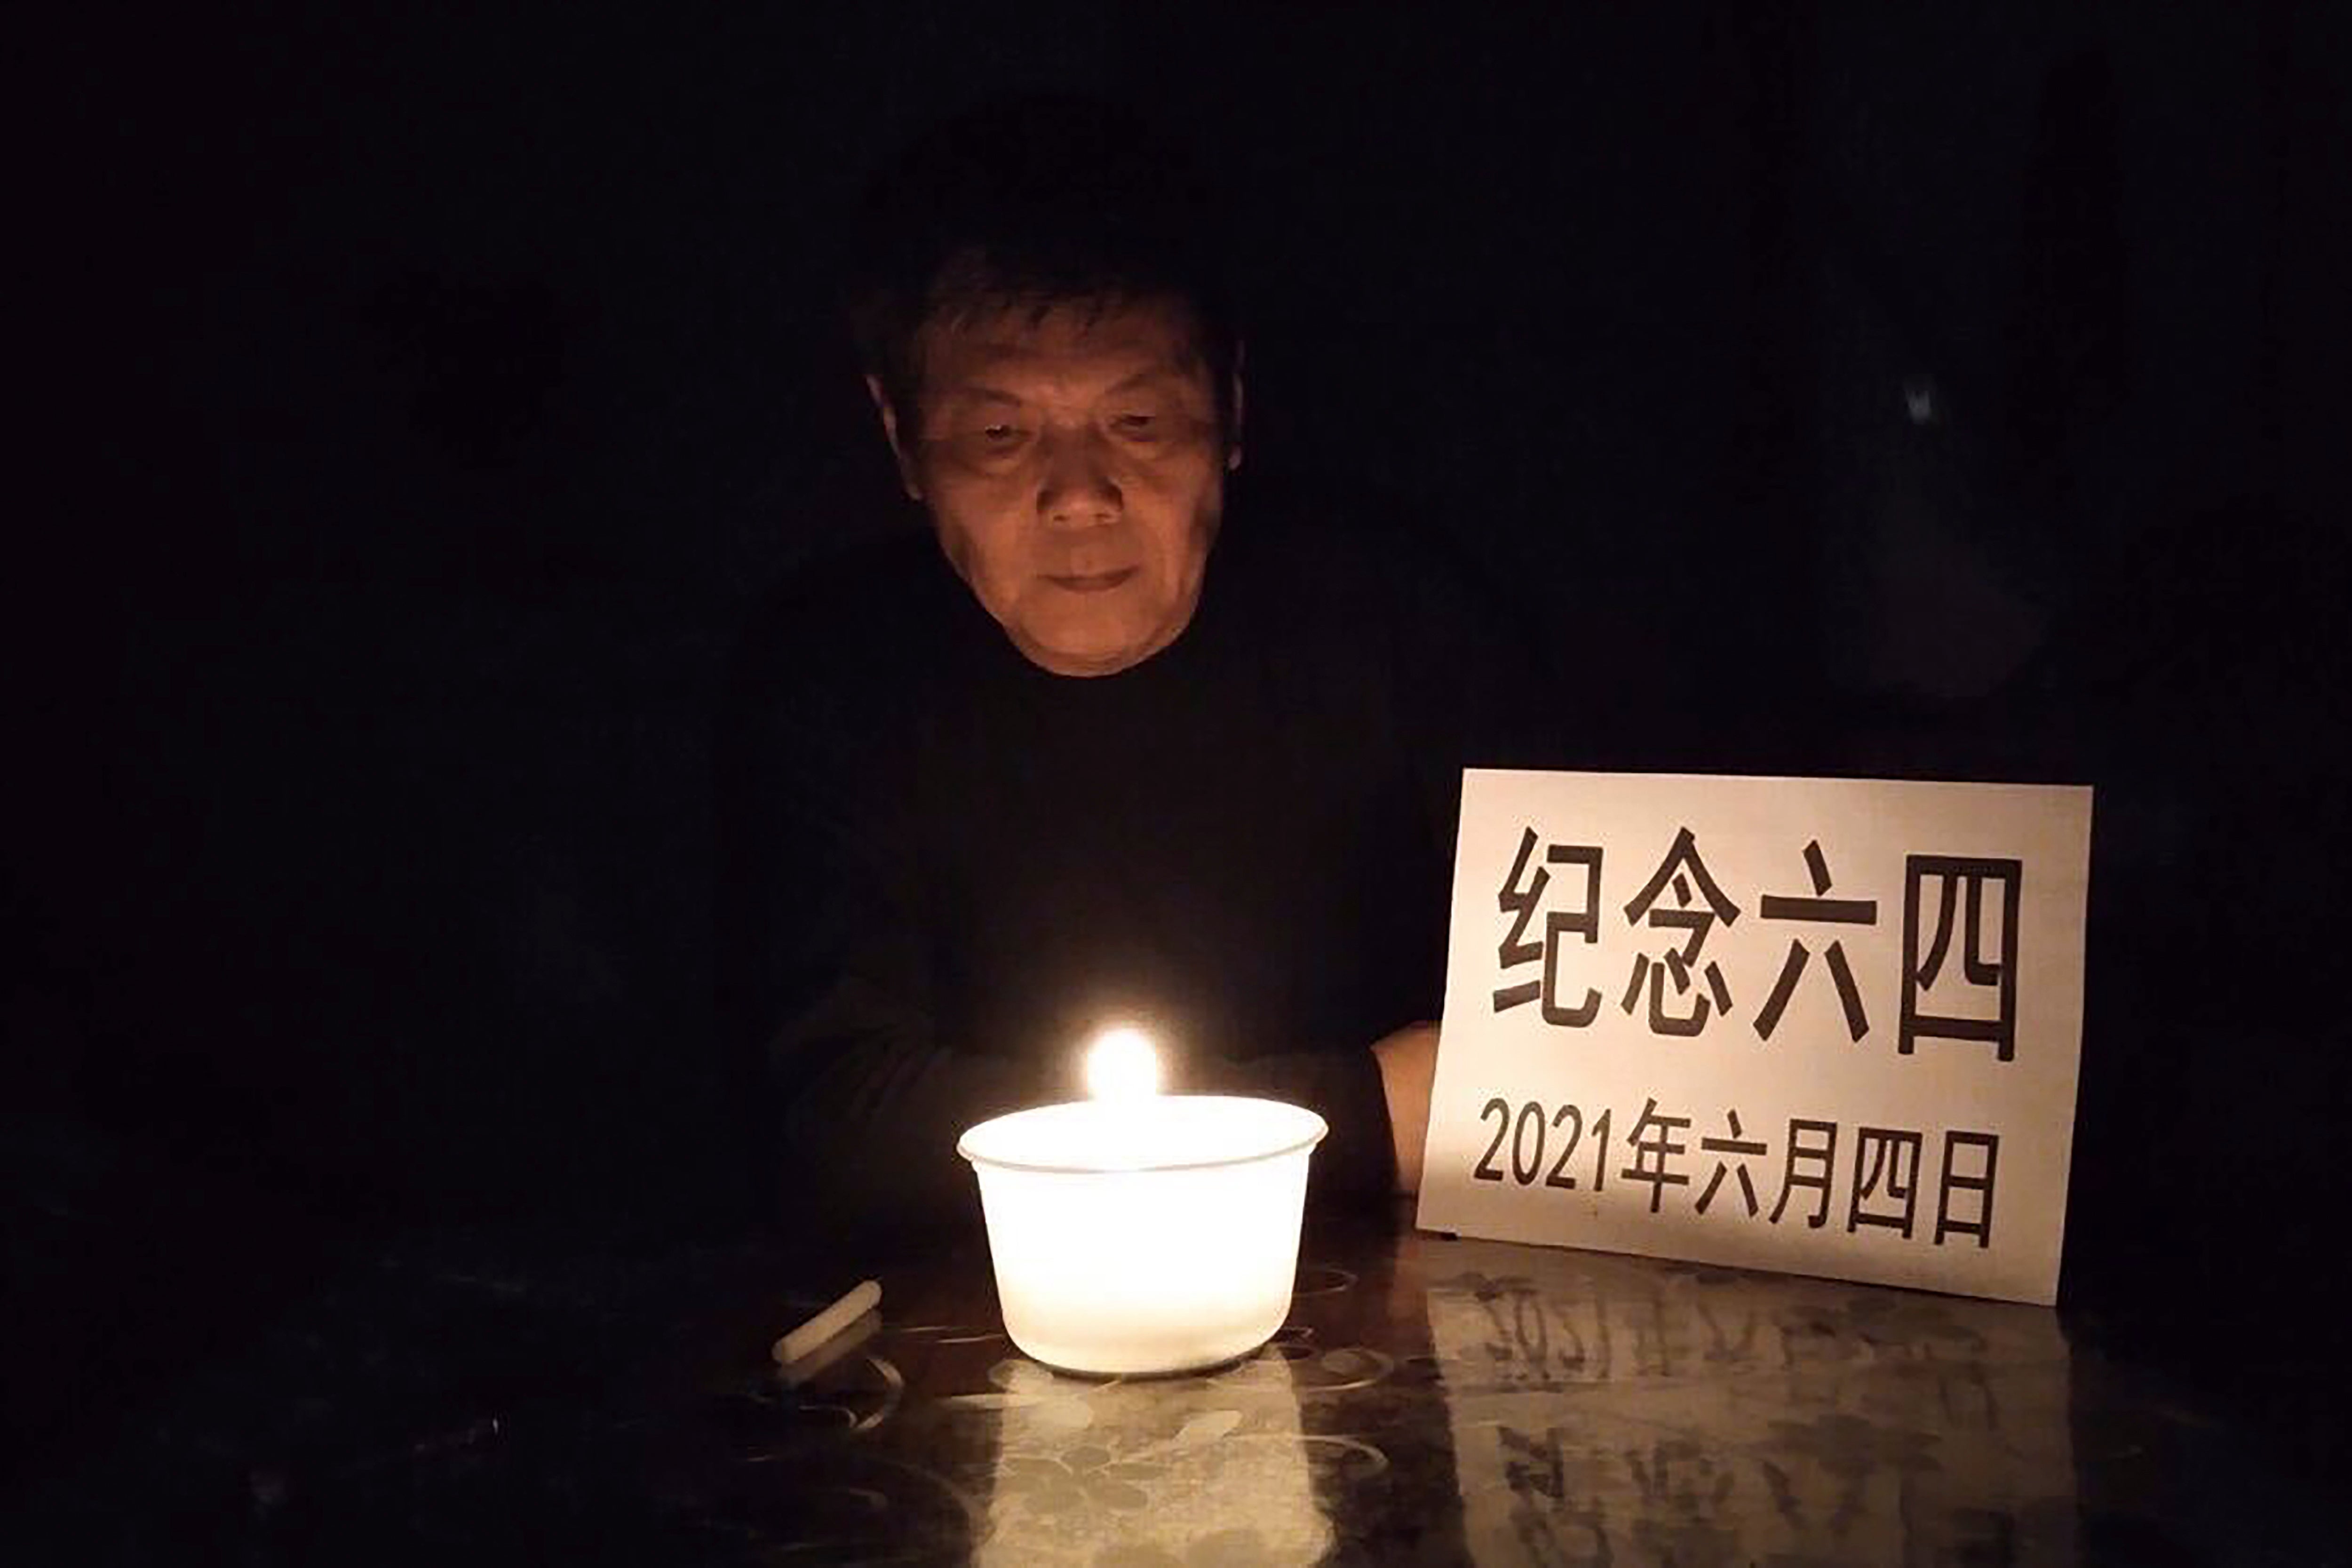 In this photo taken June 4, 2021 and released by Chen Siming, he poses for photos with a paper which reads ‘Commemorate June 4, on 2021, June 4’ near a candle light in Zhuzhou in central China’s Hunan province. The Chinese dissident is known for regularly commemorating the 4 June 1989 crackdown on pro-democracy protesters in Beijing’s Tiananmen Square